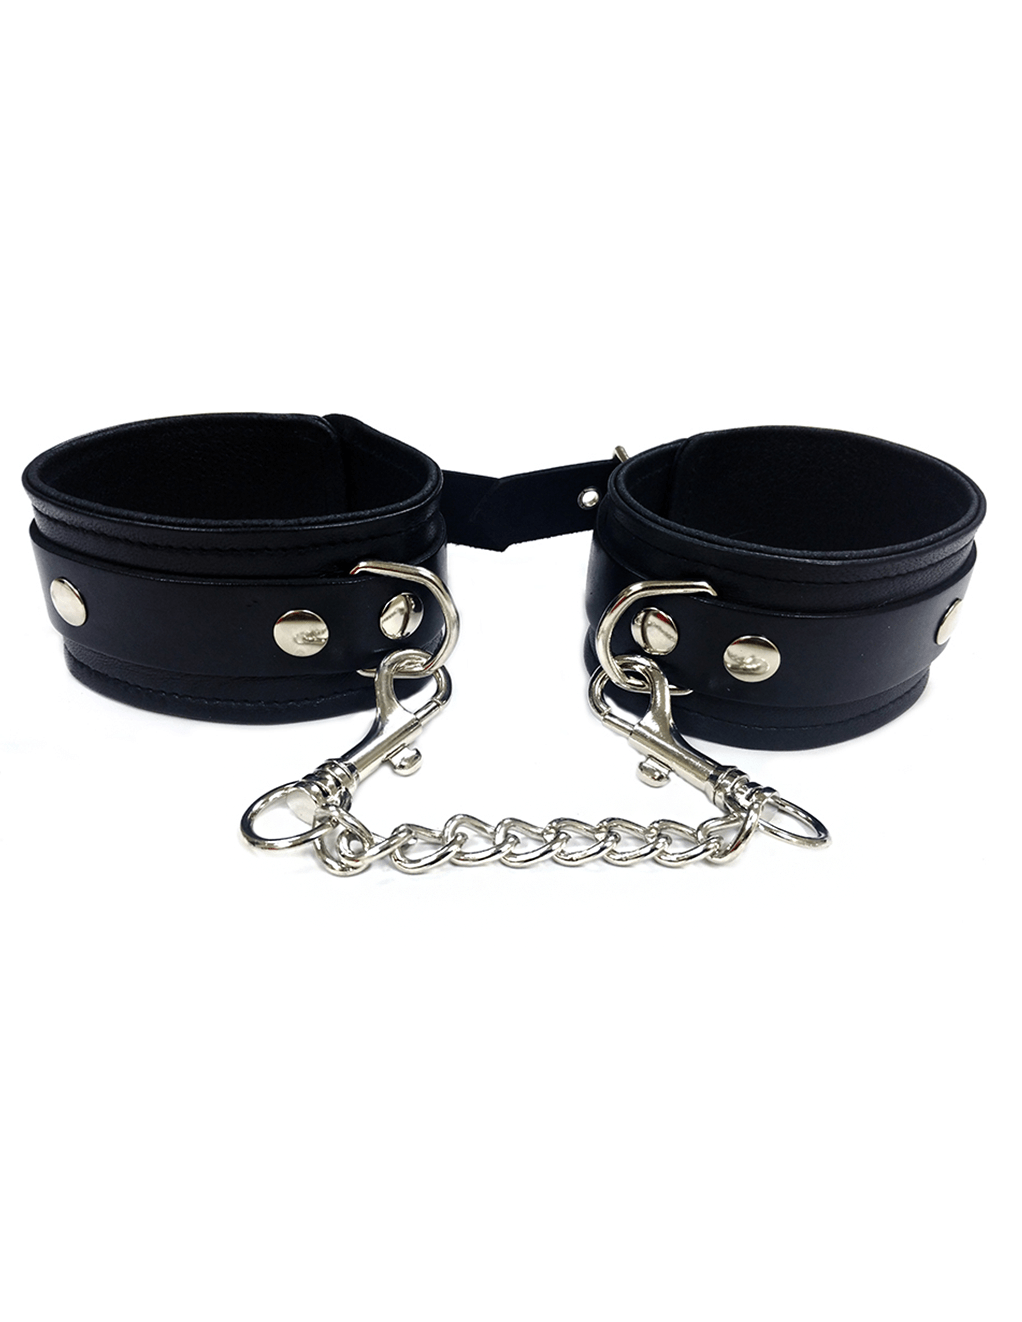 Rouge Leather Ankle Cuffs - Black - Main